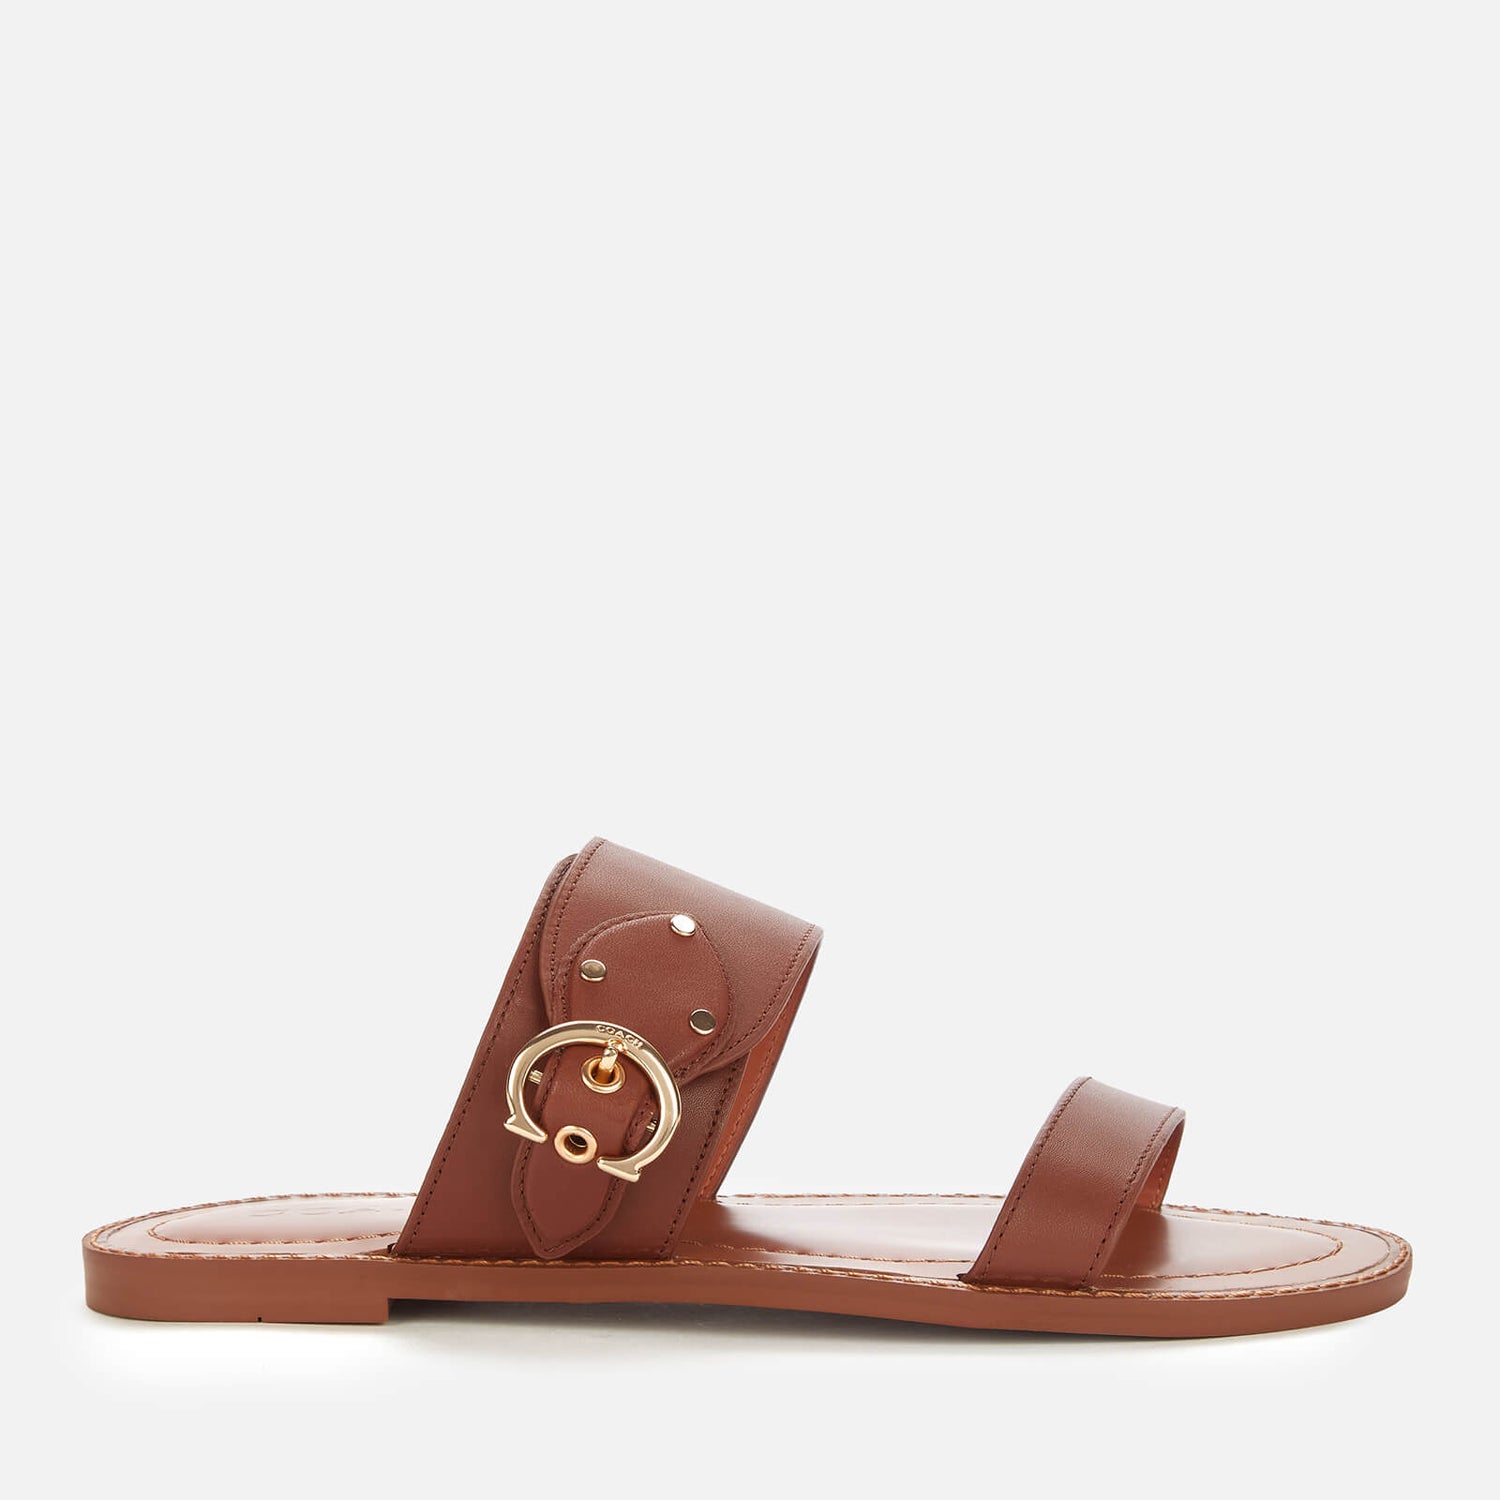 Coach Women's Harlow Leather Sandals - Saddle | FREE UK Delivery | Allsole